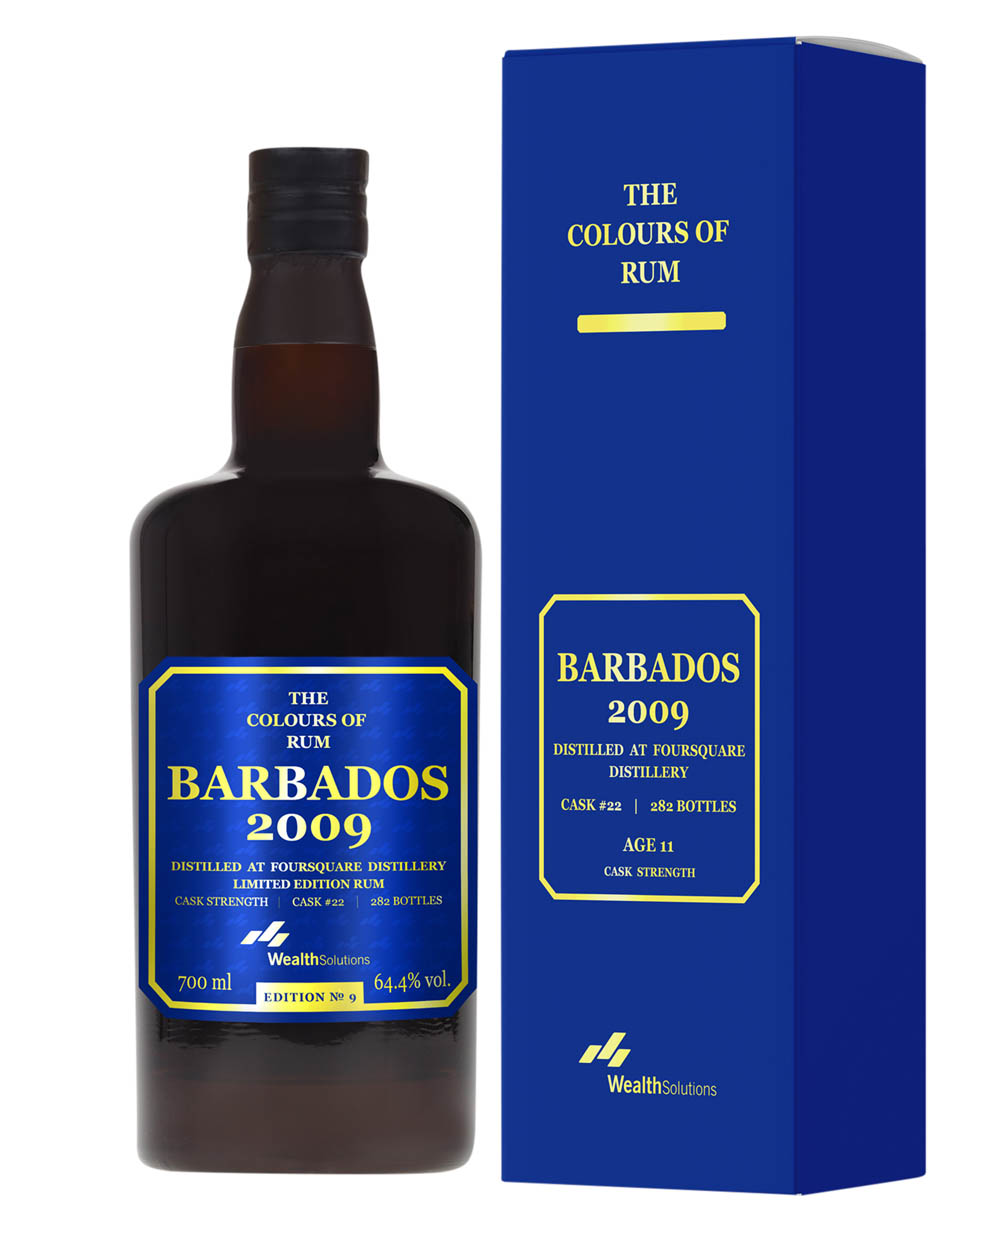 Foursquare Barbados 2009 The Colours Of Rum Edition 9 Box Musthave Malts MHM